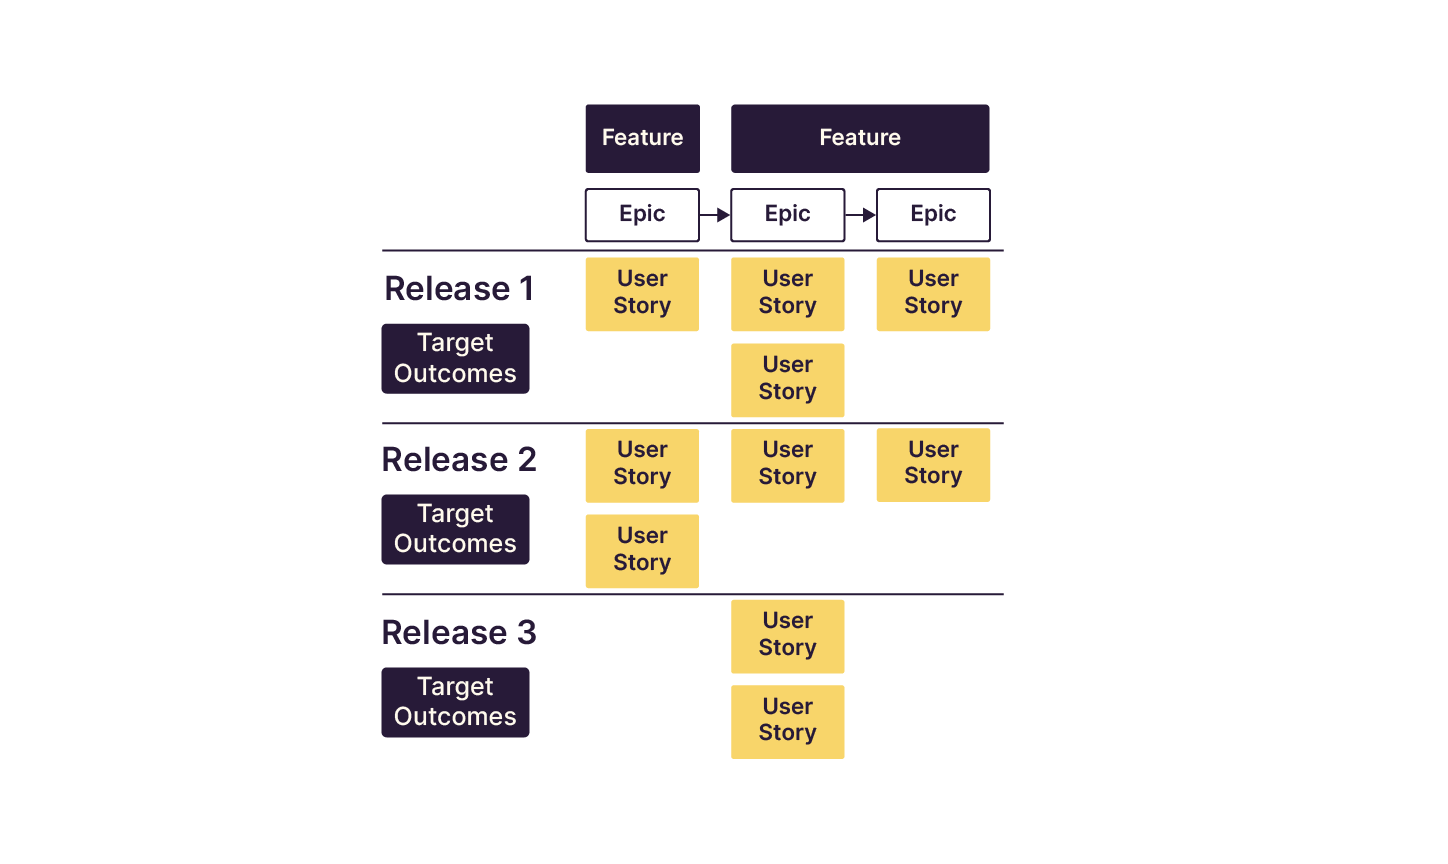 The image outlines how user stories are grouped under releases in Agile project planning. Two 'Features' are broken down into 'Epics', which are further divided into 'User Stories'. These stories are then organized into three separate 'Releases', each wit